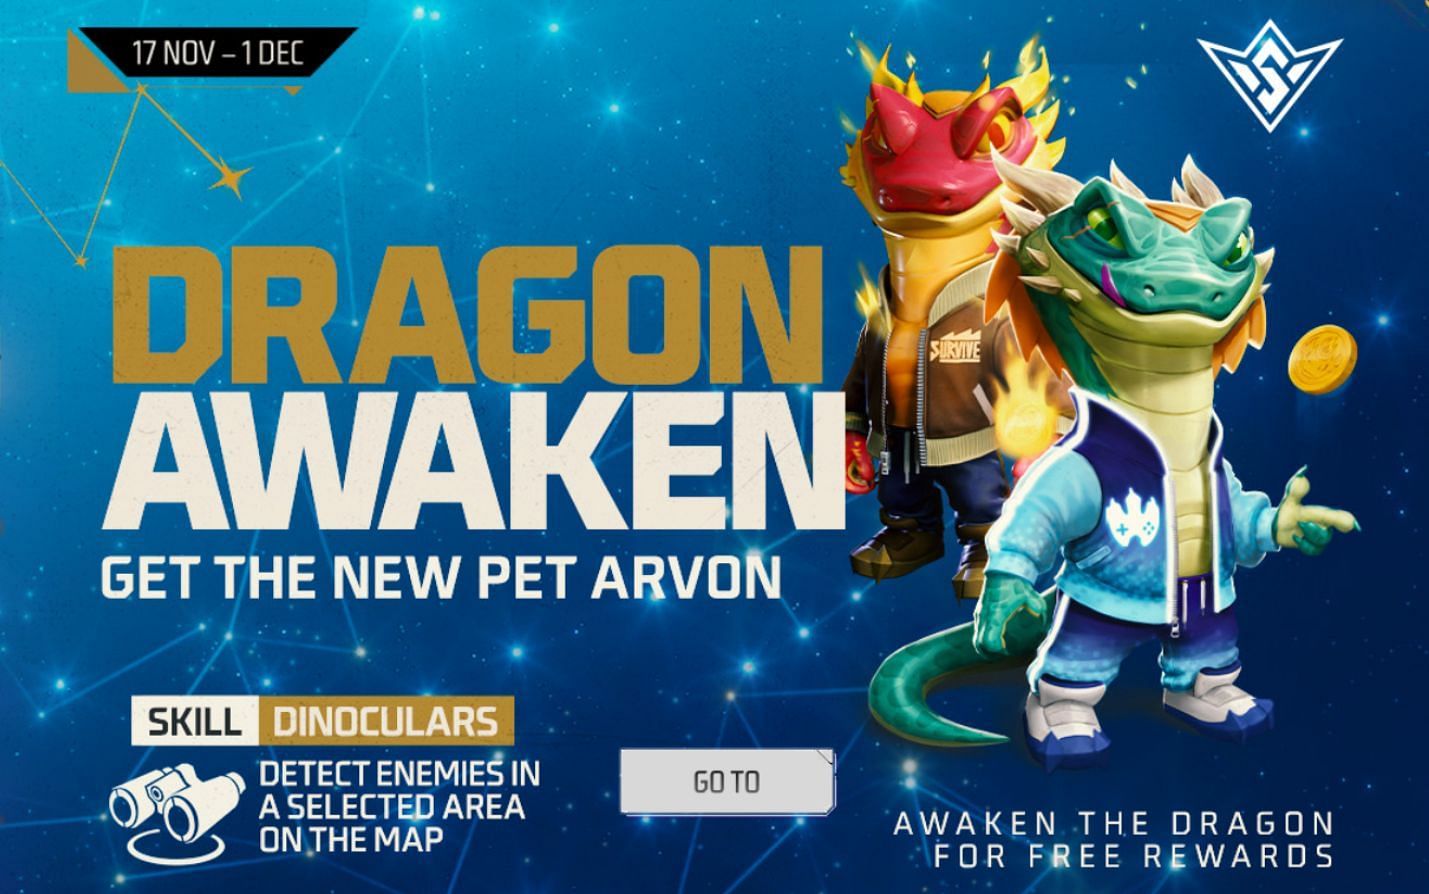 Arvon is available in the game via the Dragon Awaken event (Image via Garena)